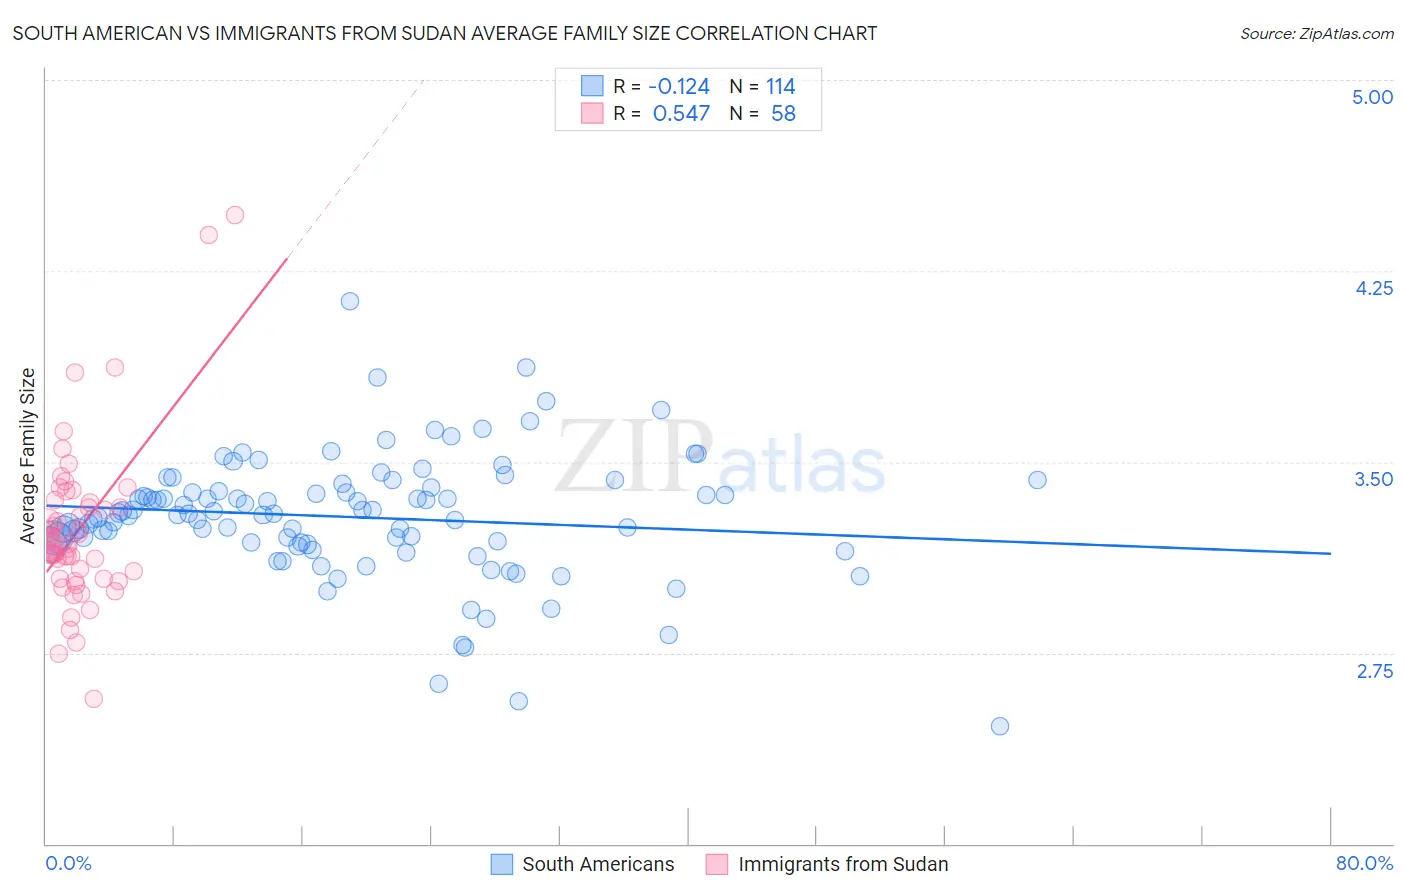 South American vs Immigrants from Sudan Average Family Size